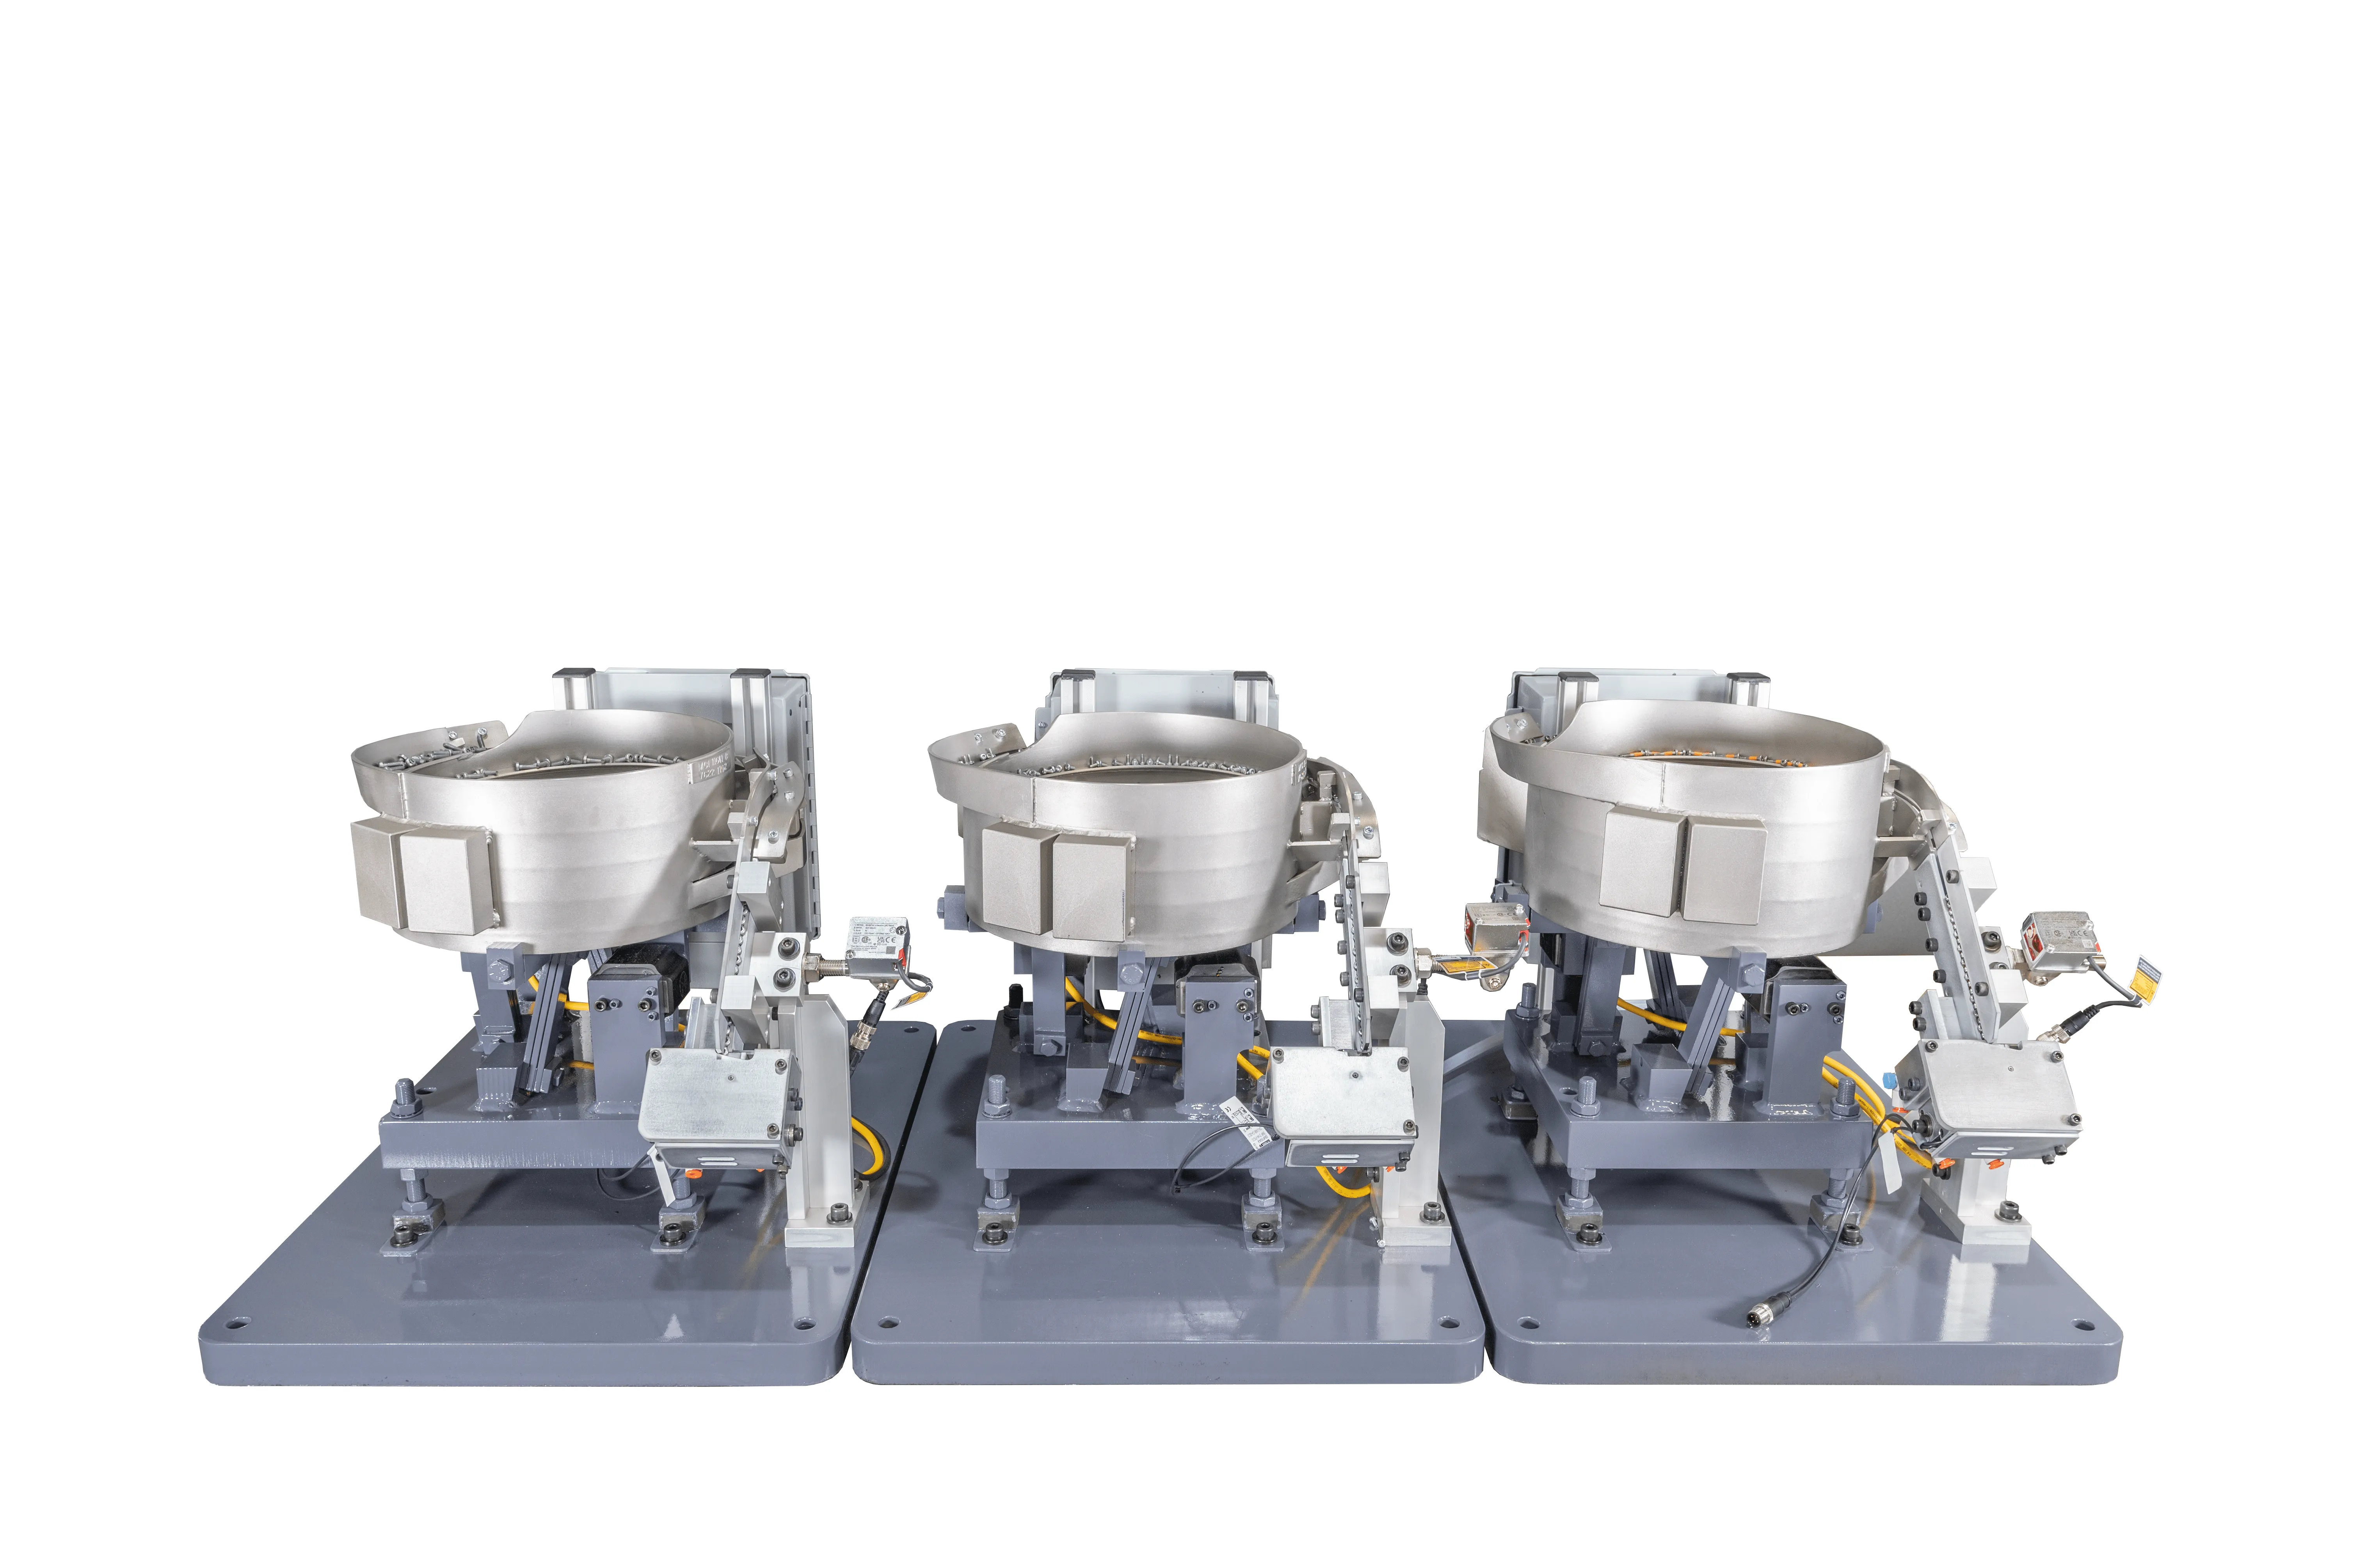 Three industrial vibratory bowl feeders on a white background.